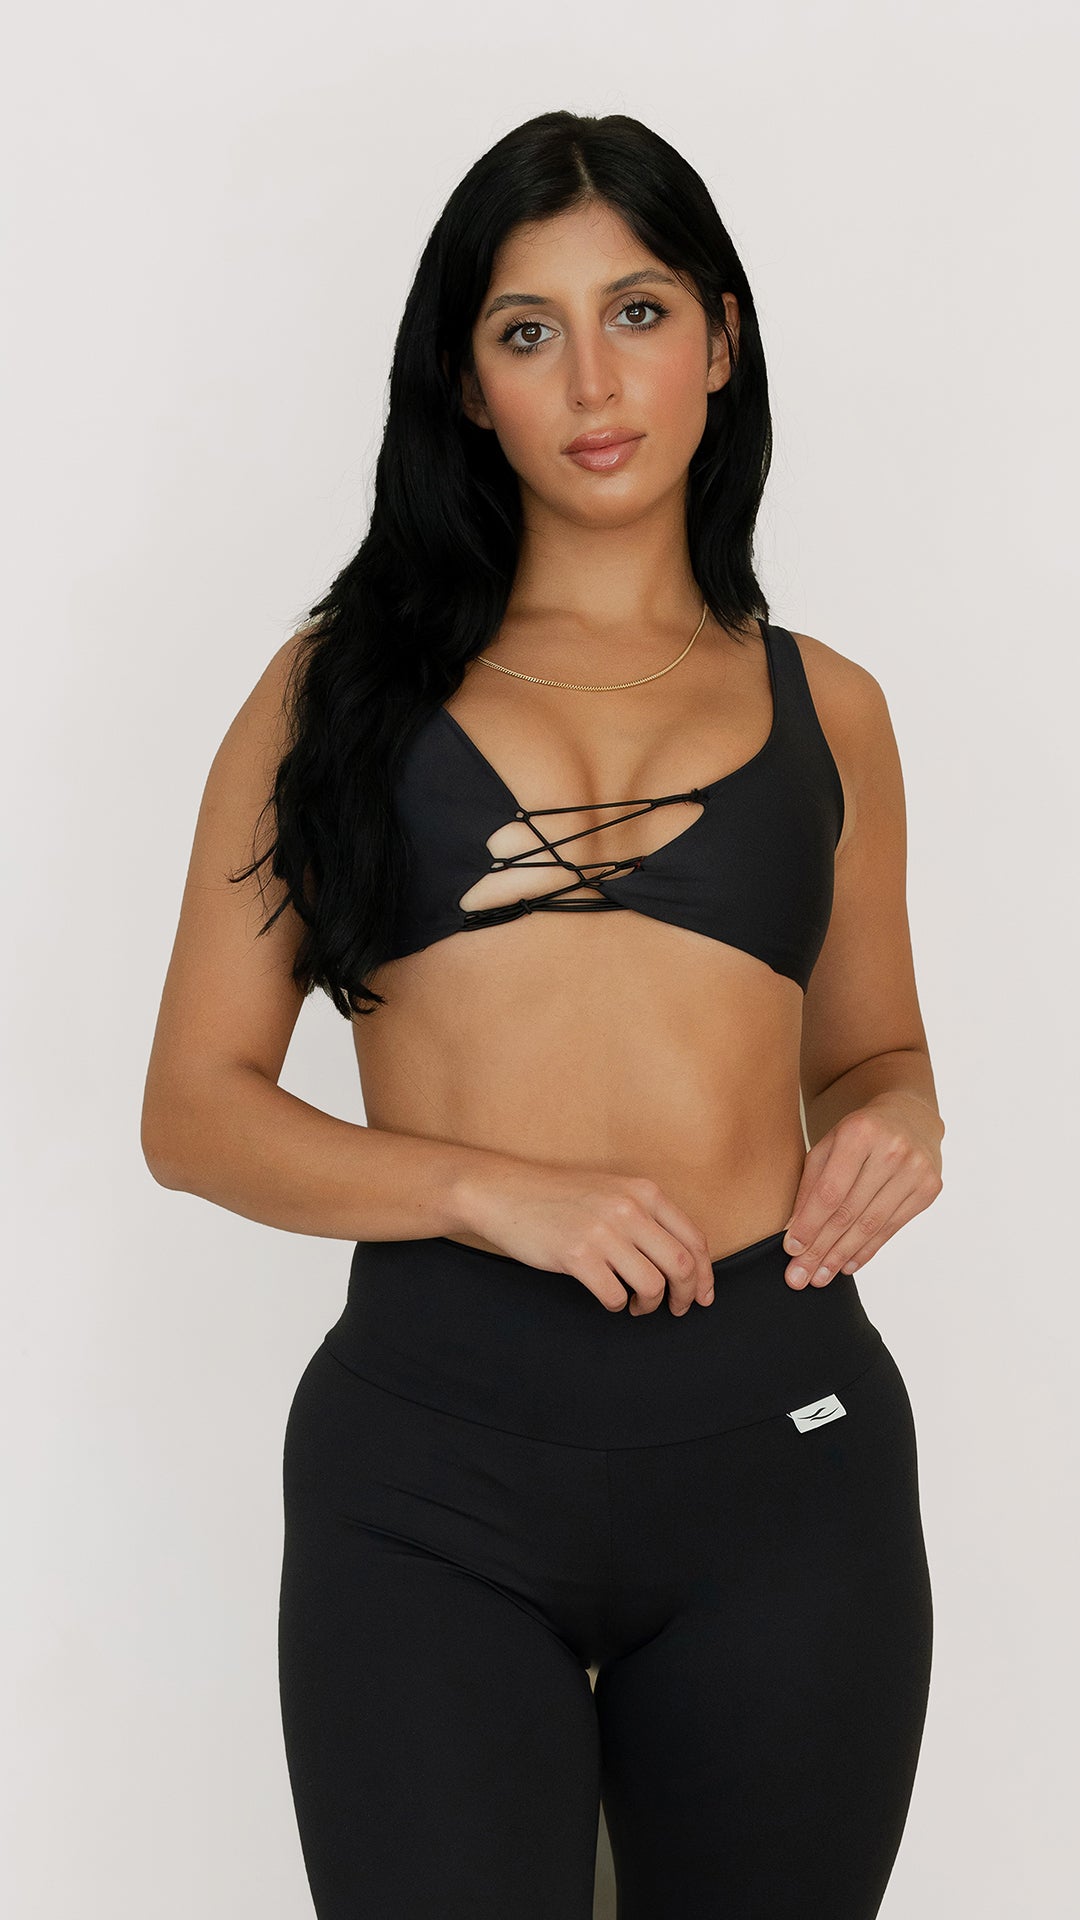 The Black High-waisted LUX Leggings – MONHNNY